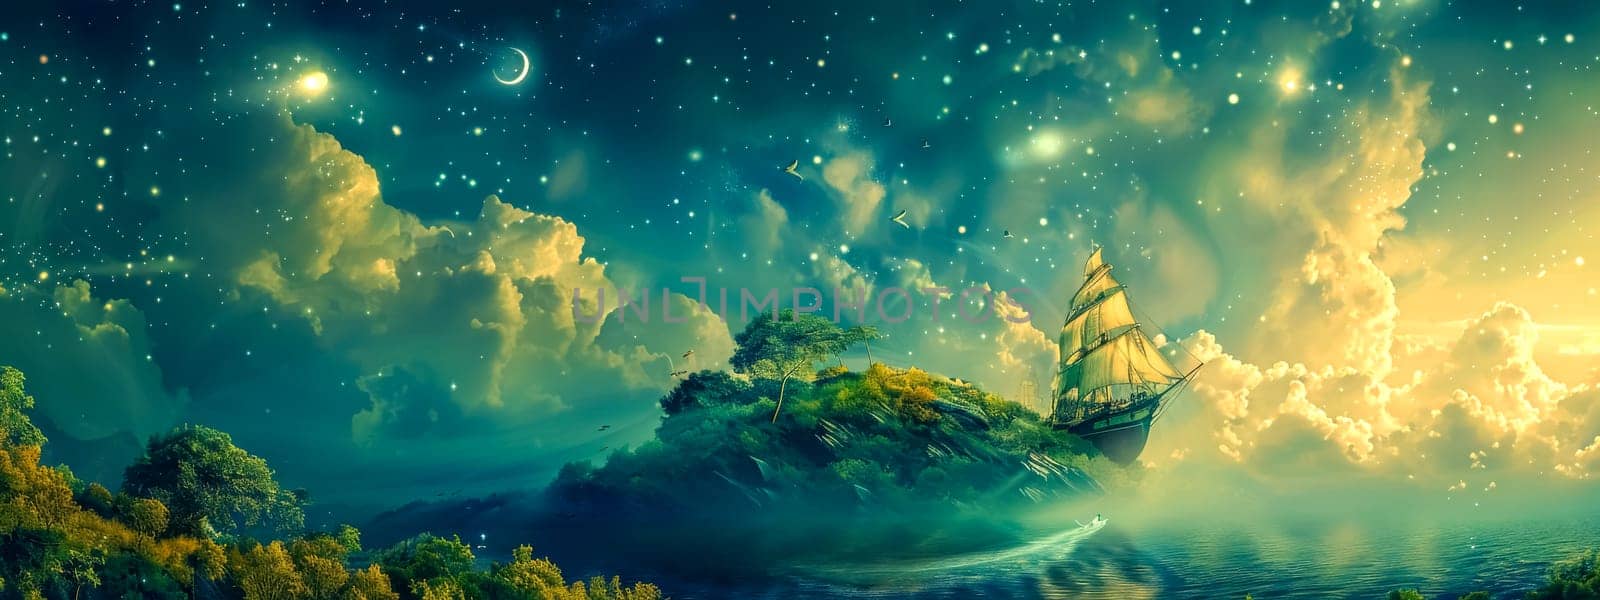 Dreamlike fantasy scene featuring an old ship sailing beside a floating island under a starry sky with crescent moon